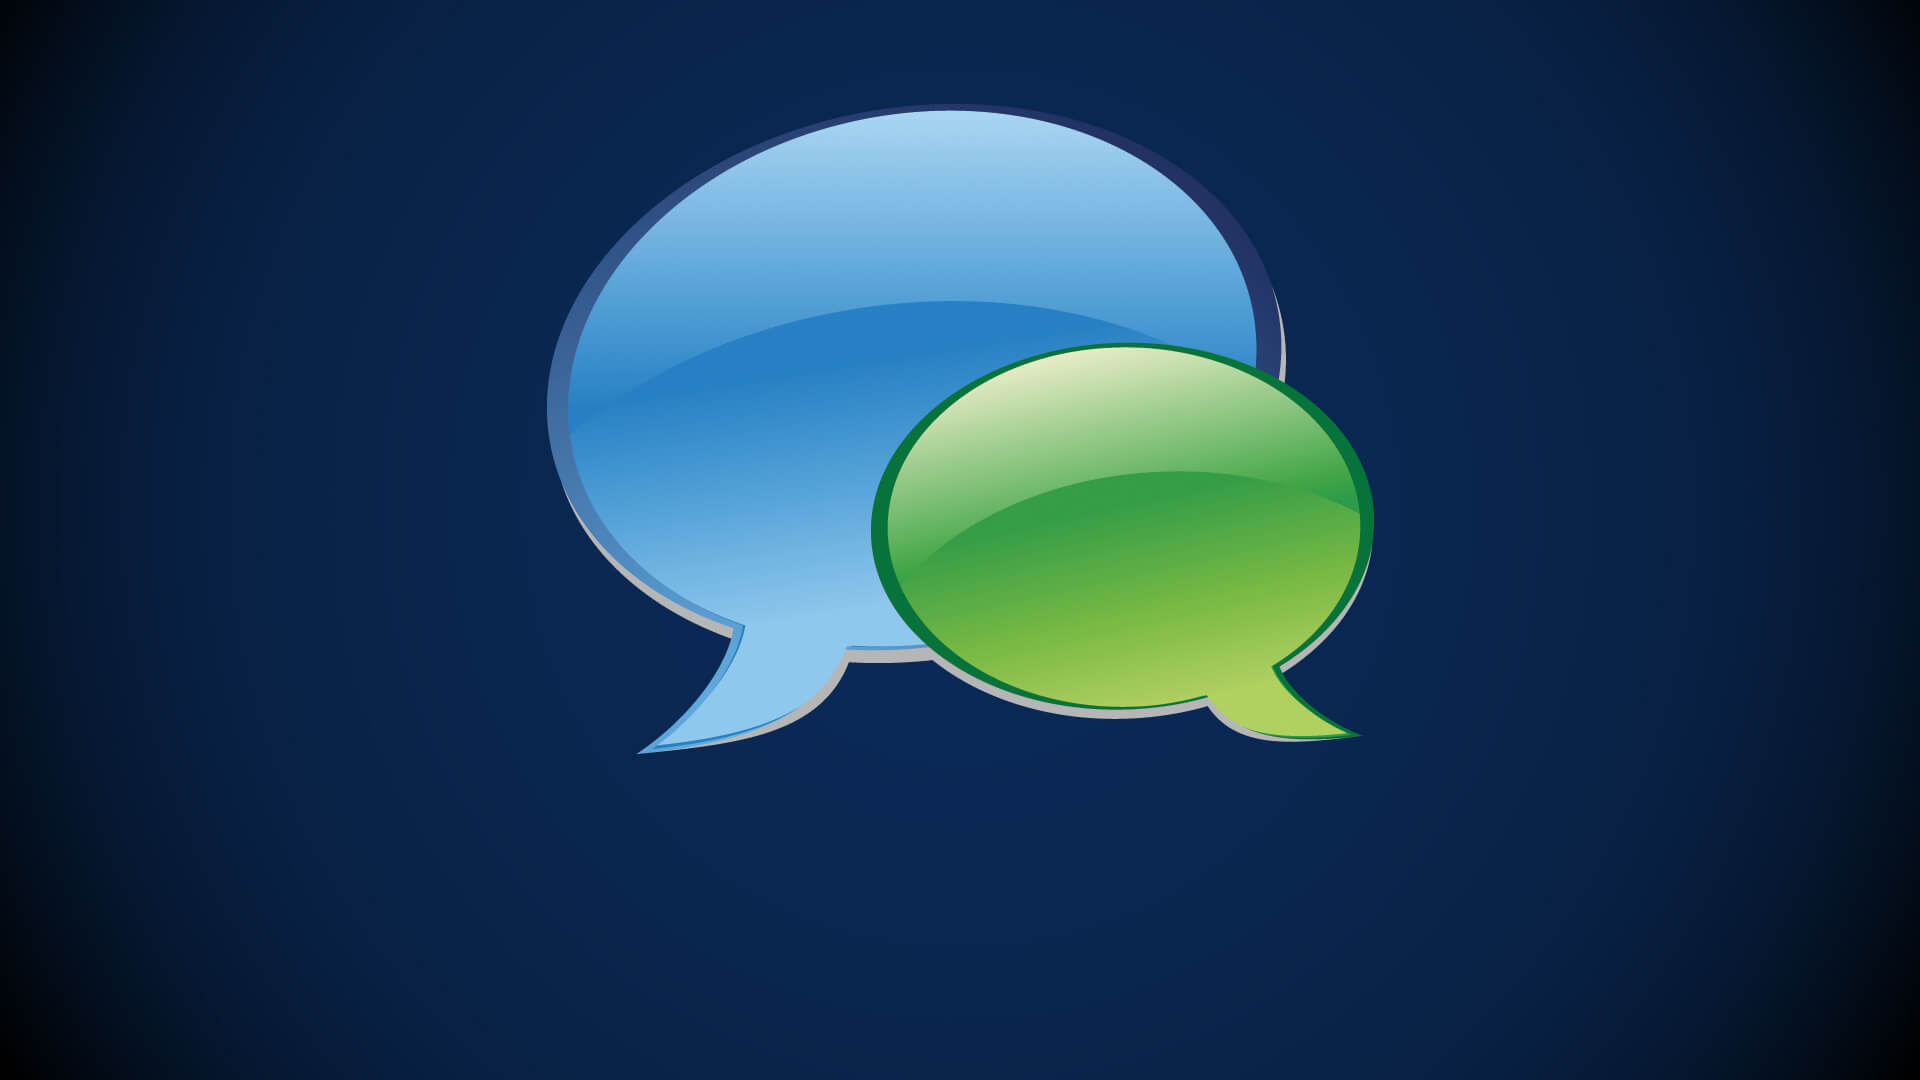 text-message-chat-bubbles2-ss-1920